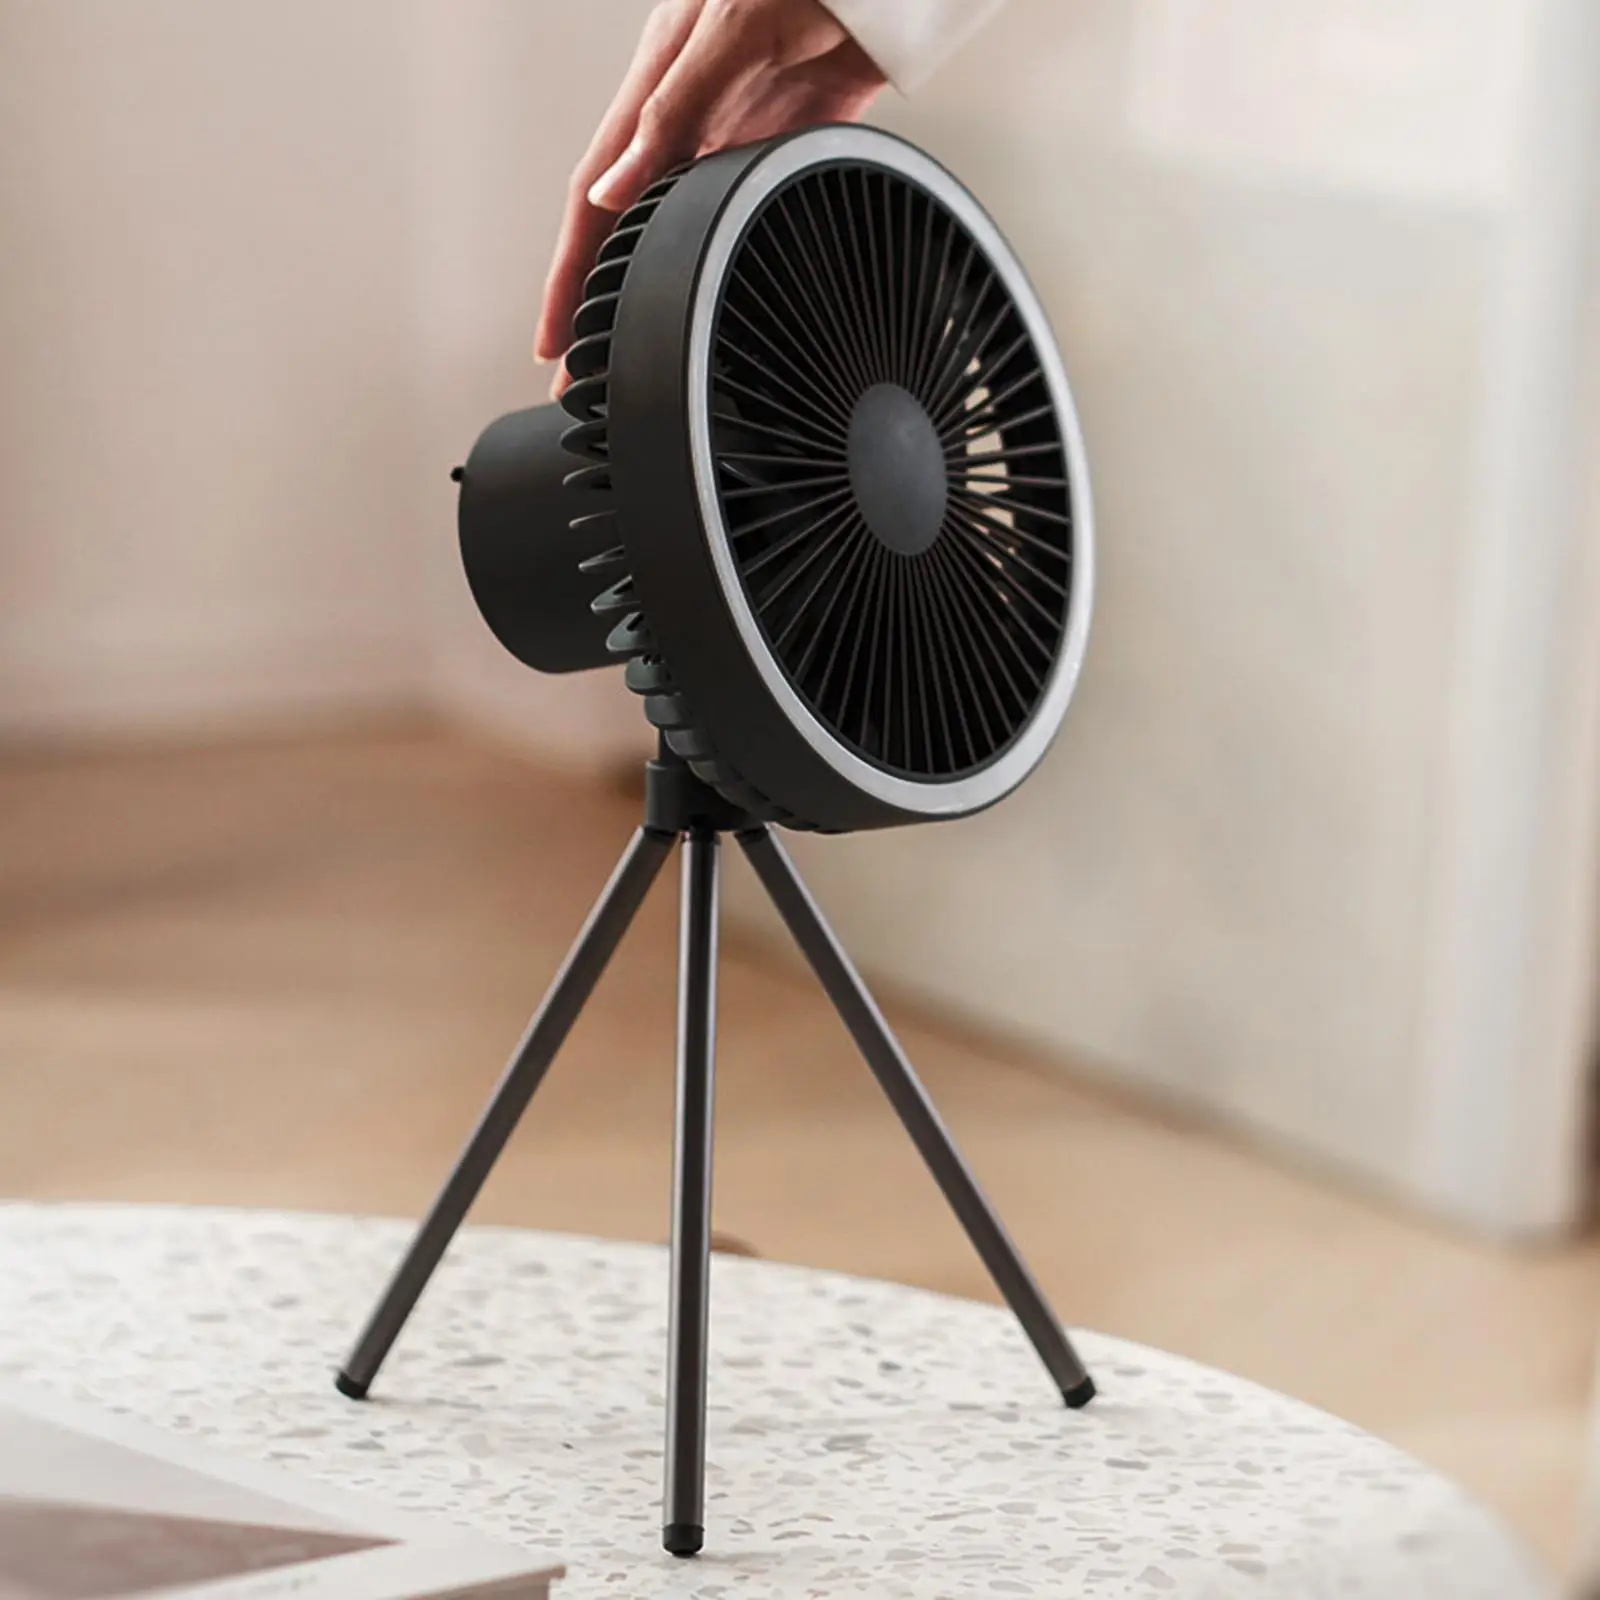 Air Circulator Fan Outdoor Camping Desk Fan with Tripod for Travel Tent Home